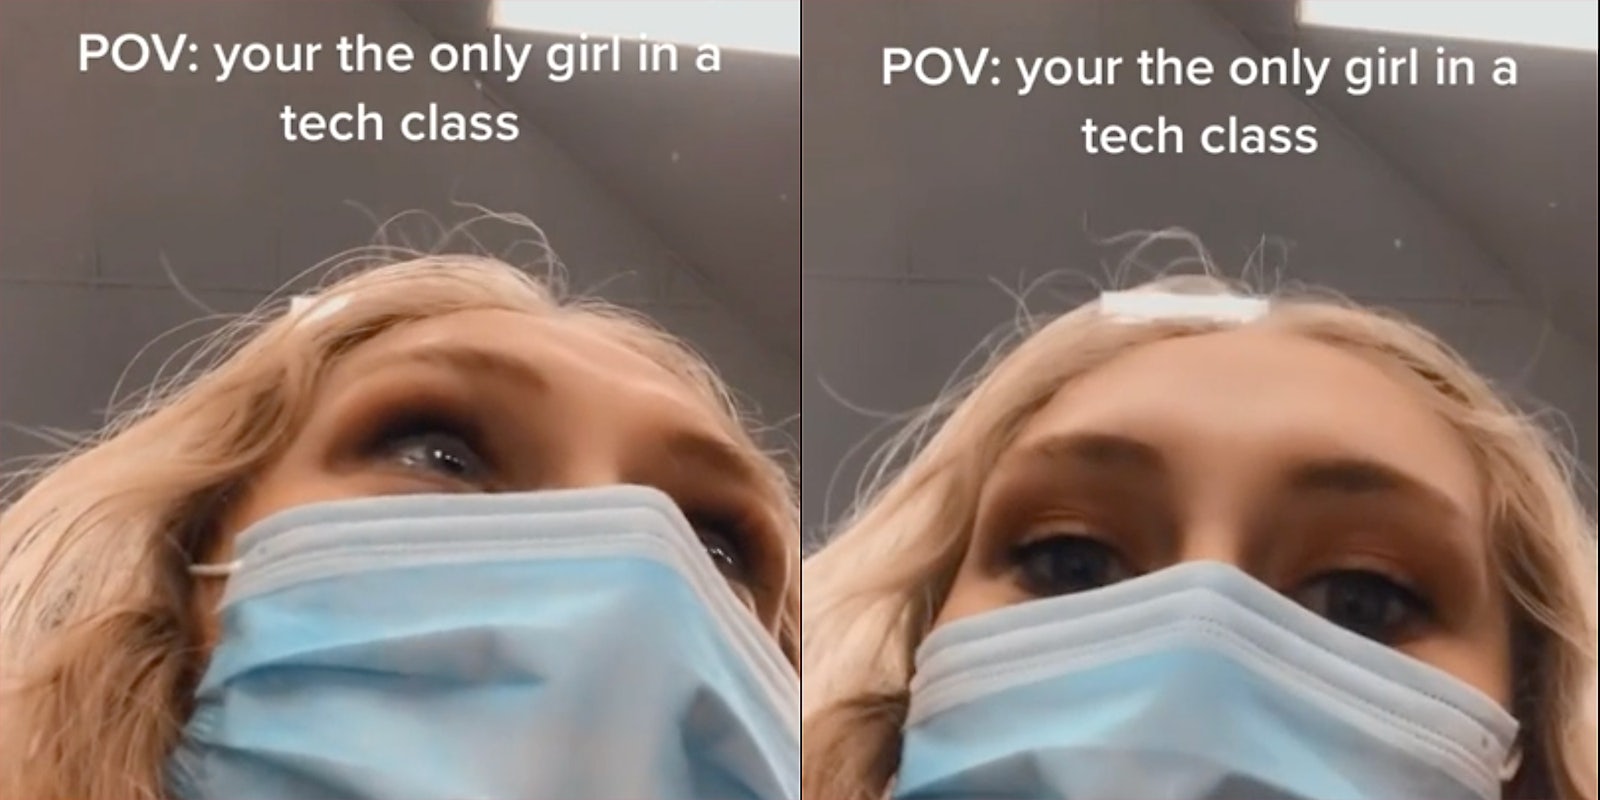 A girl wearing a surgical mask.